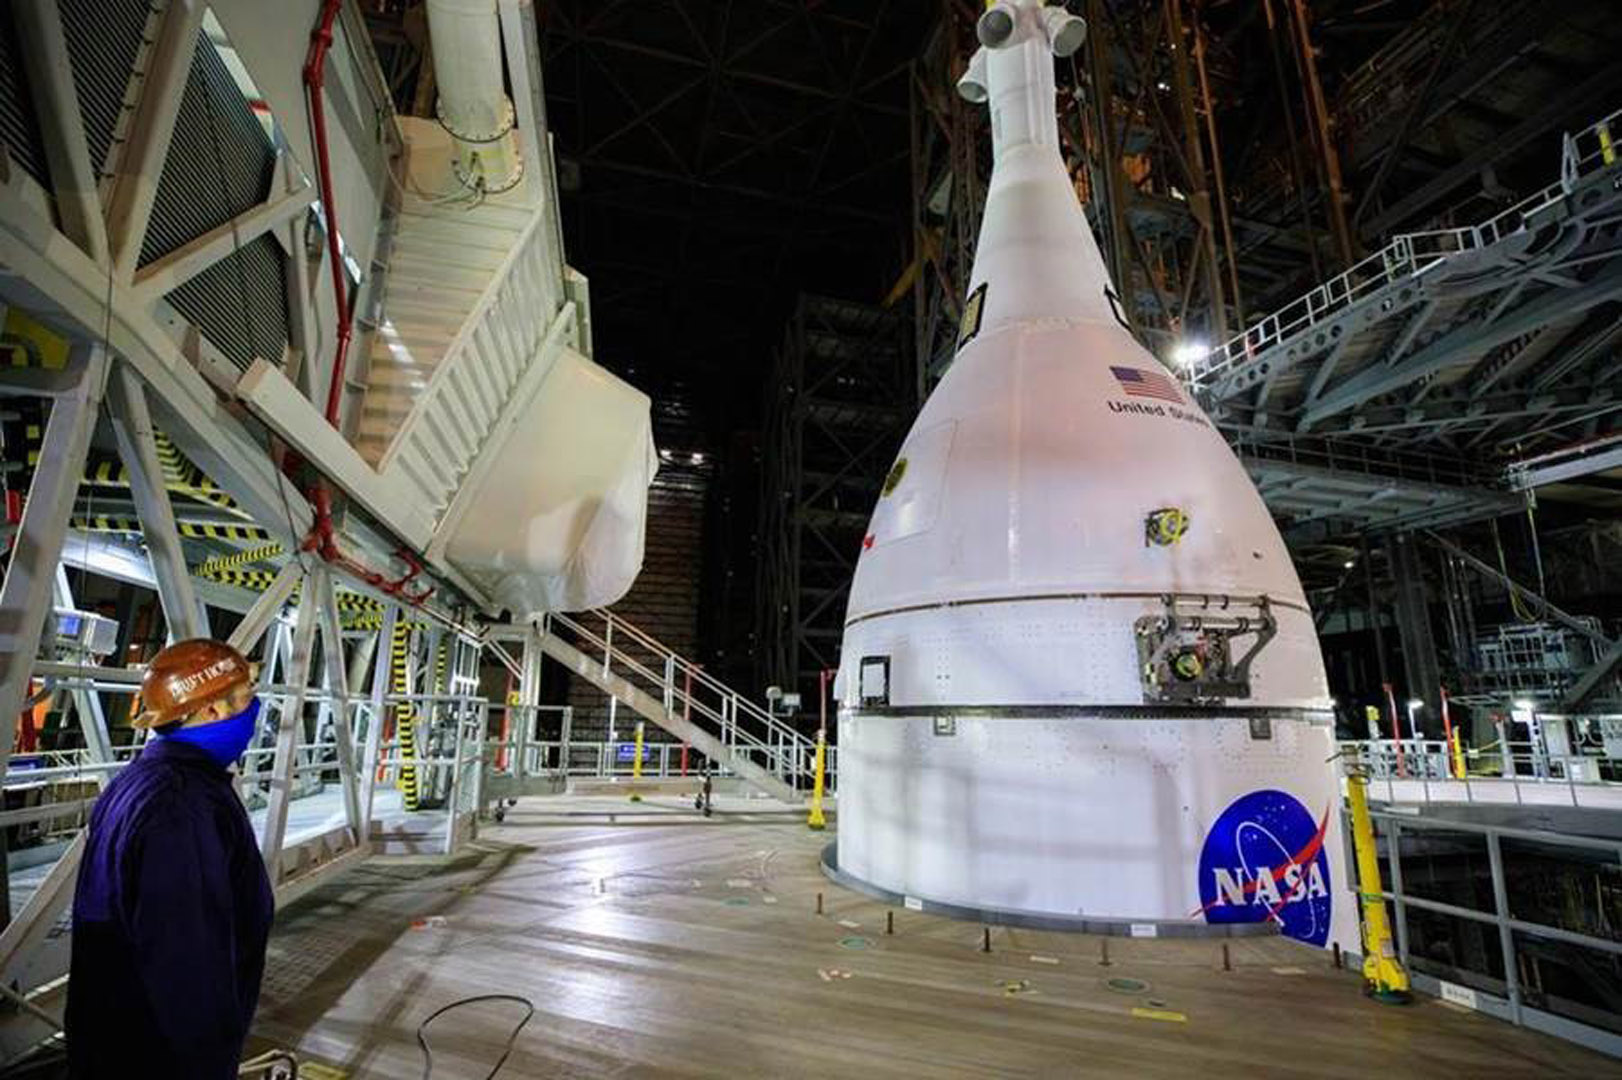 NASA's Orion space capsule that will fly uncrewed to the moon and back seen ahead of final pre-launch tests.